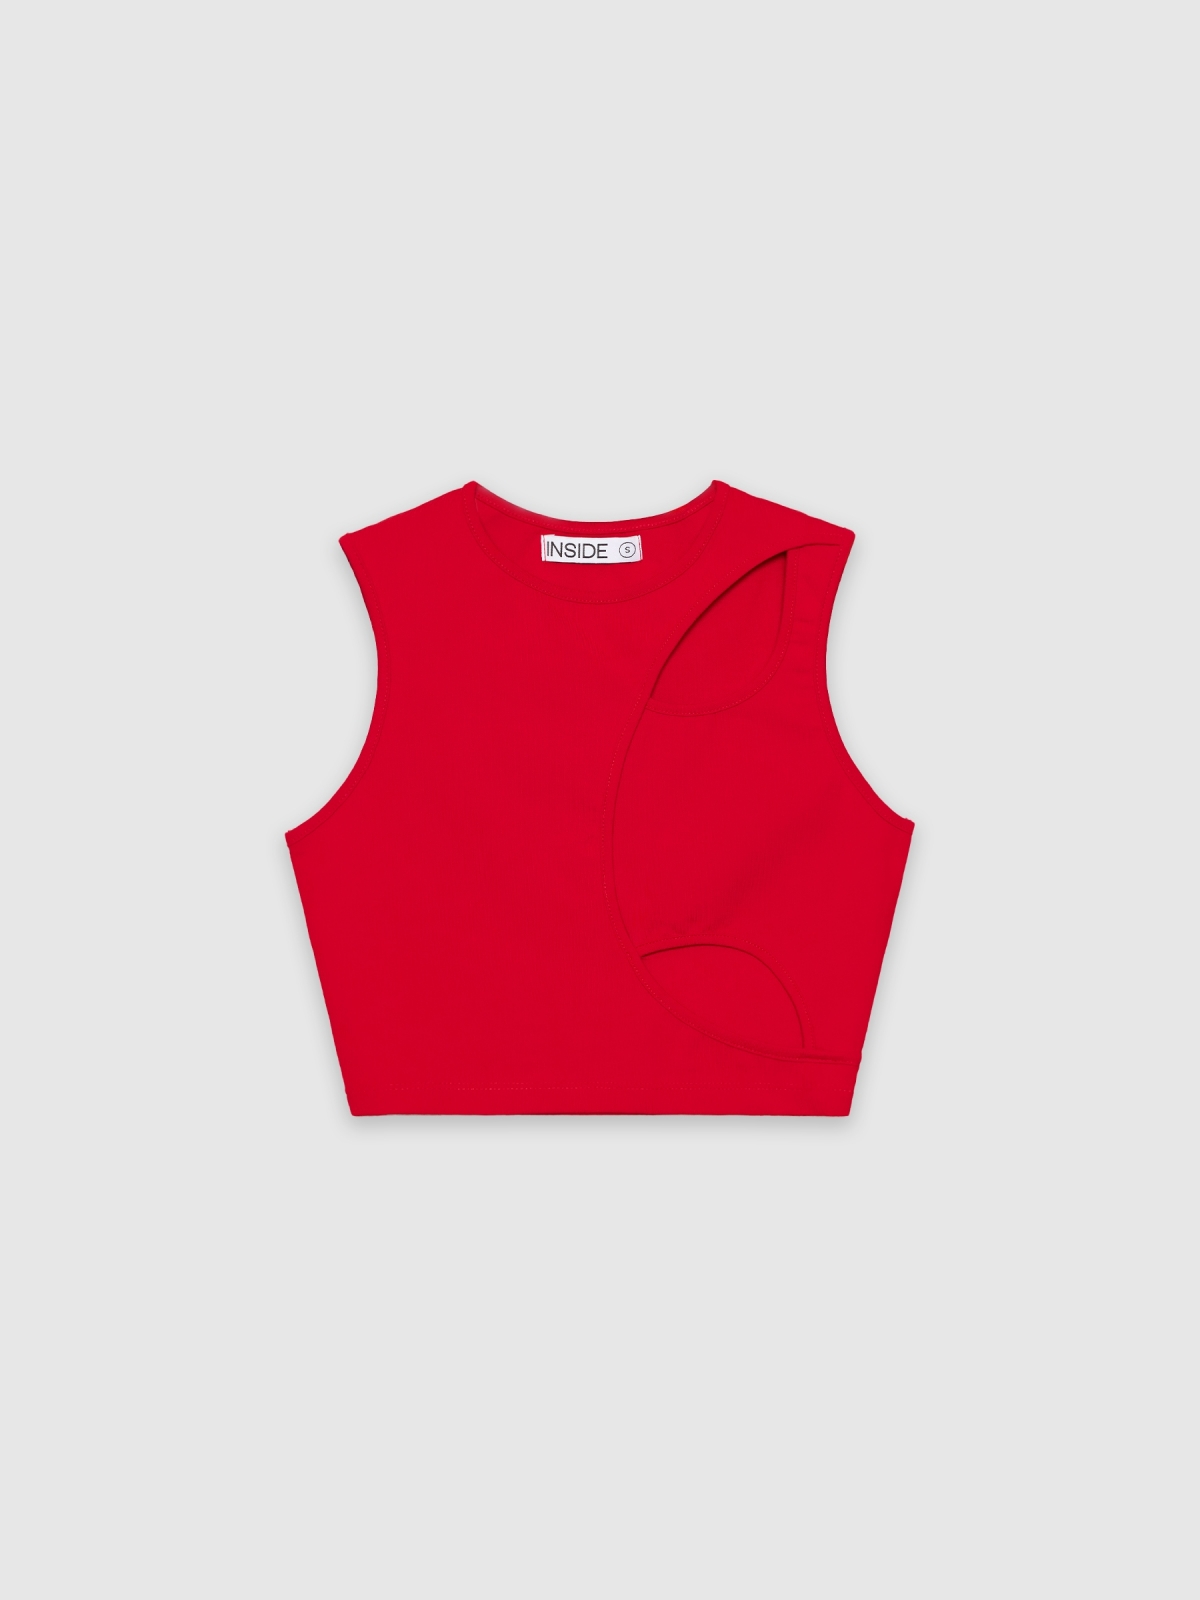  Asymmetric cut-out top red